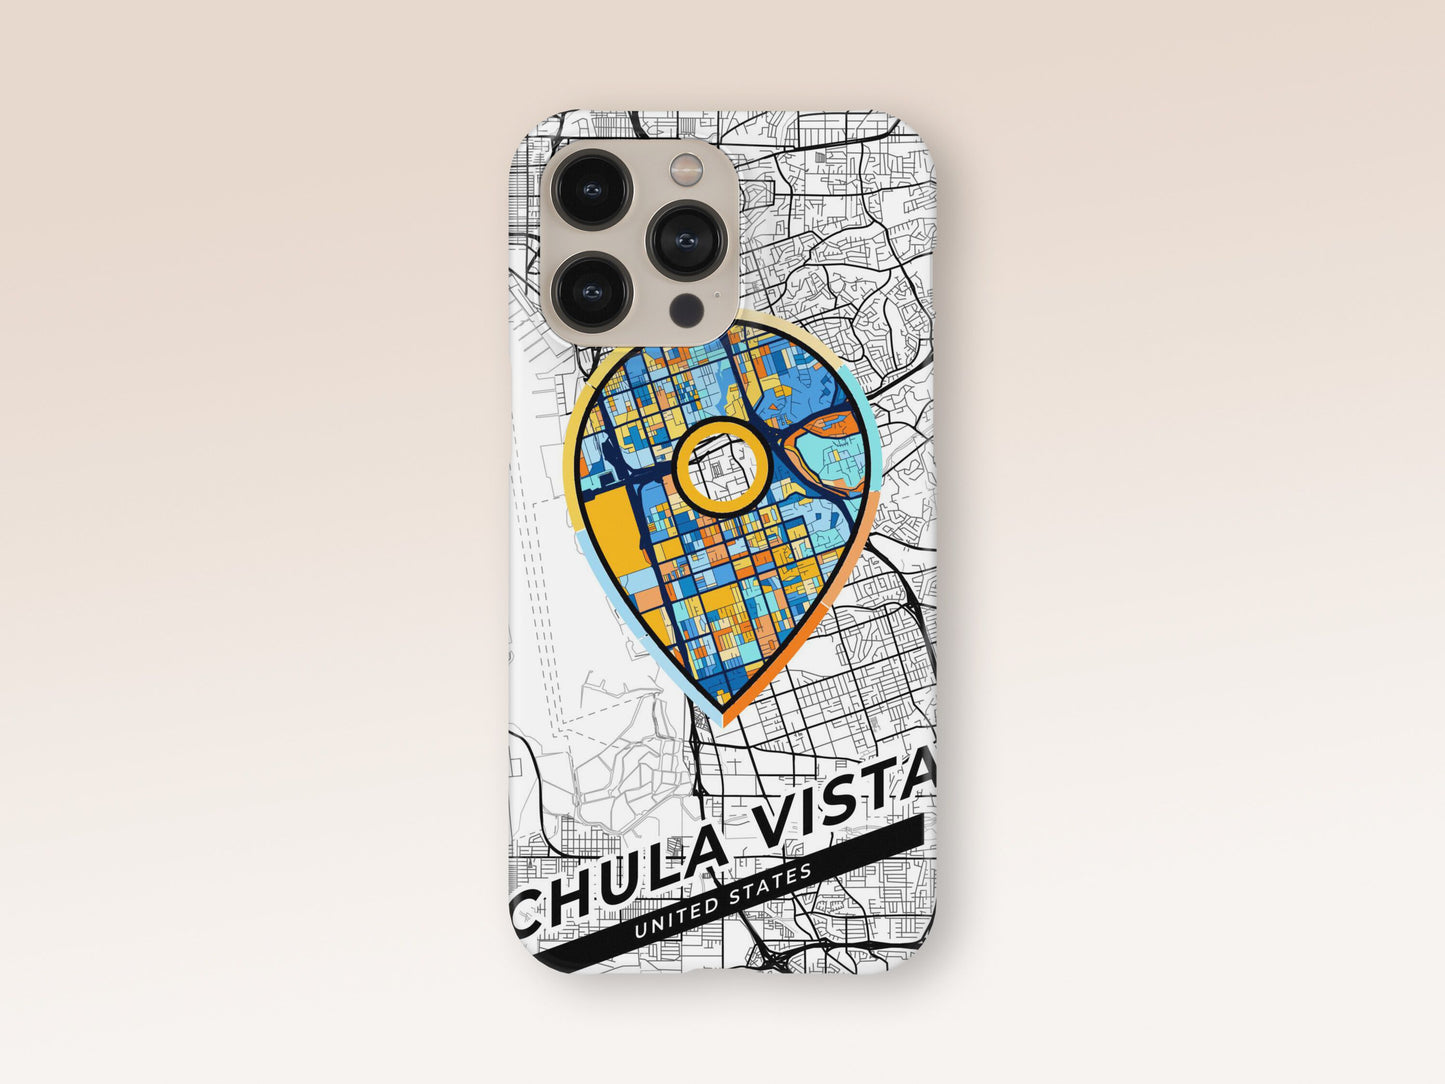 Chula Vista California slim phone case with colorful icon. Birthday, wedding or housewarming gift. Couple match cases. 1